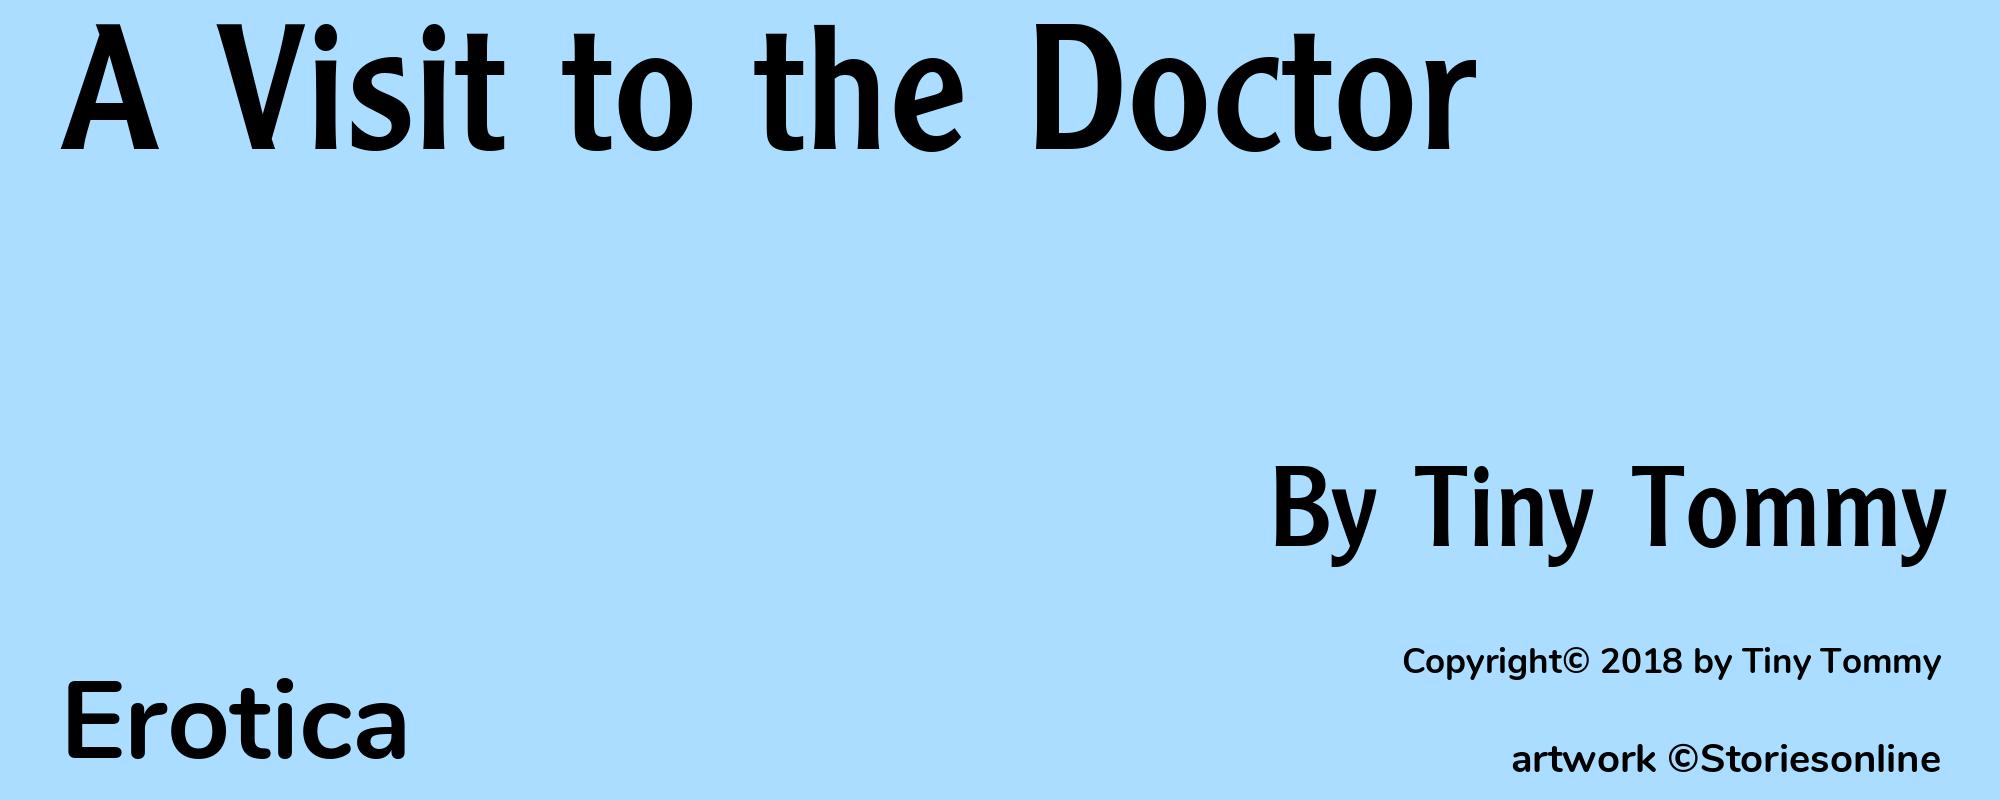 A Visit to the Doctor - Cover